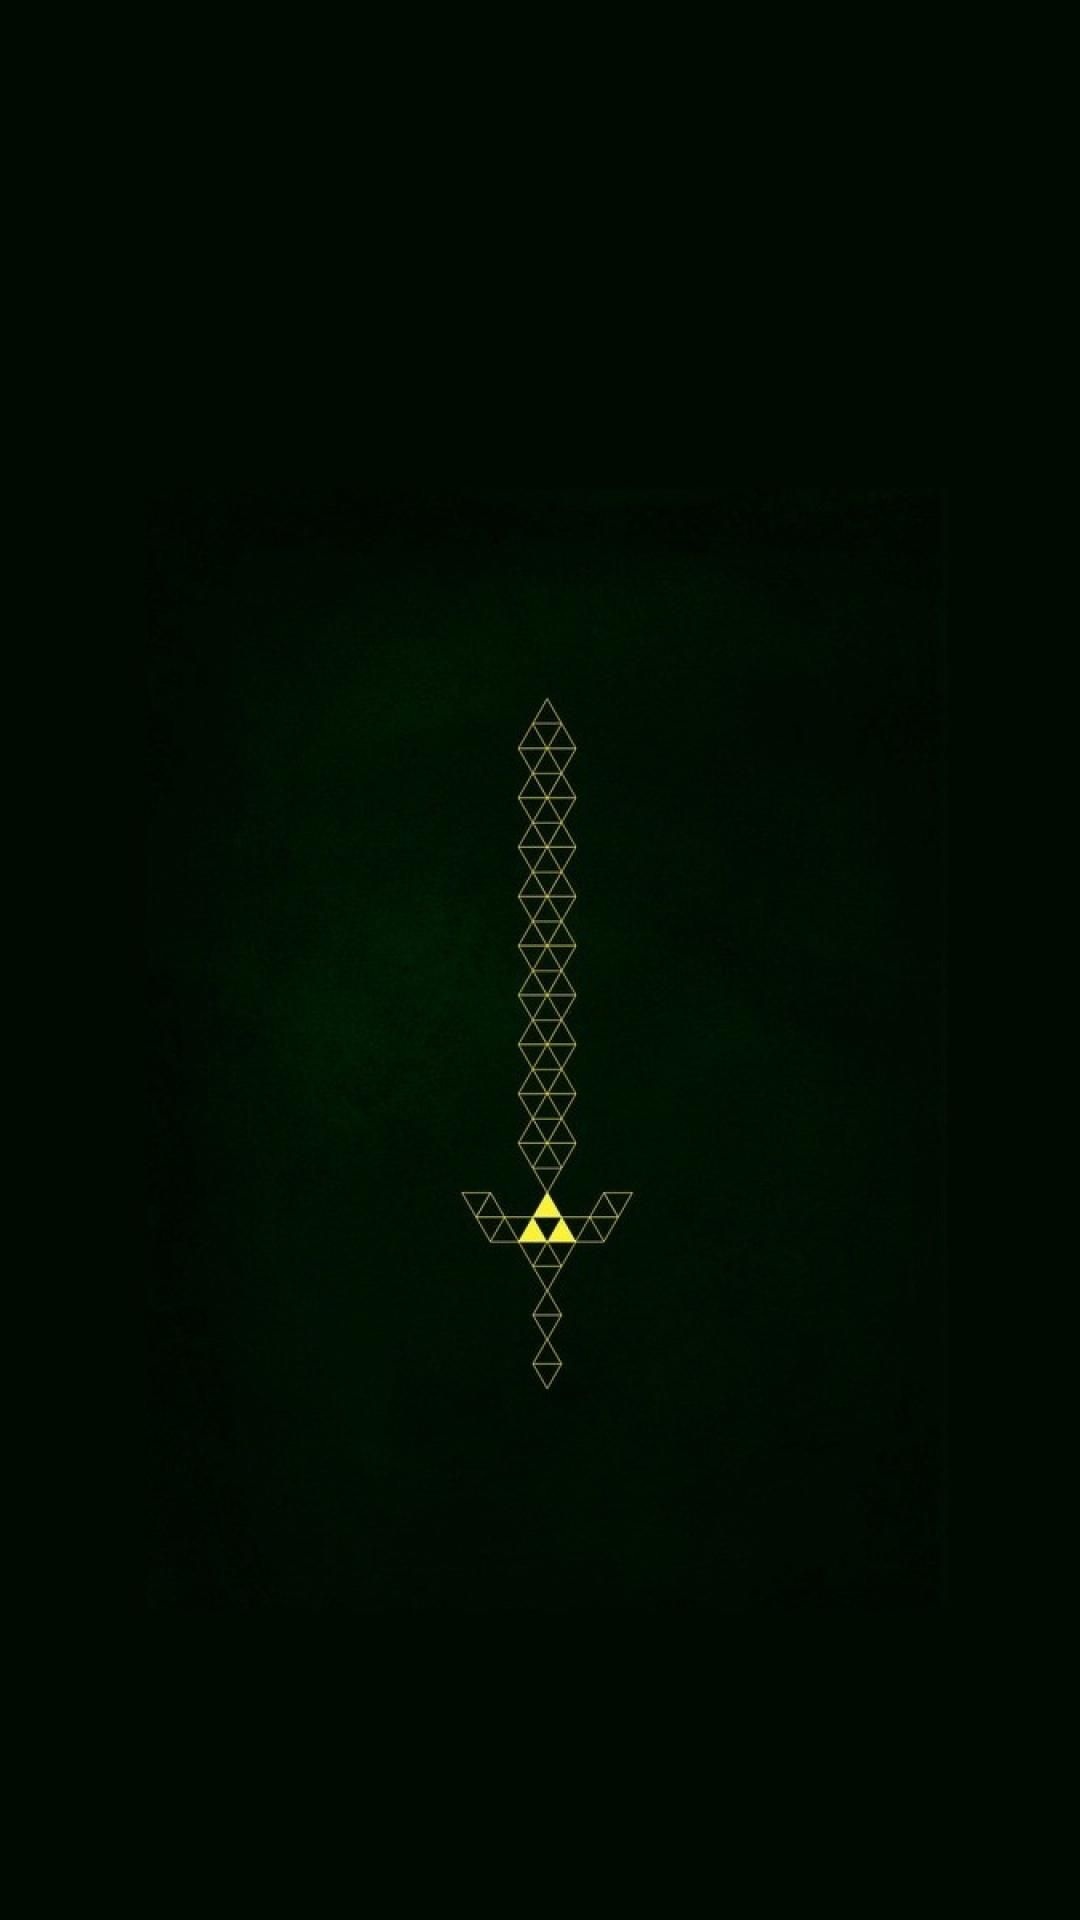 Triforce iPhone wallpapers, Gaming inspiration, Stylish mobile backgrounds, Gaming bliss, 1080x1920 Full HD Phone